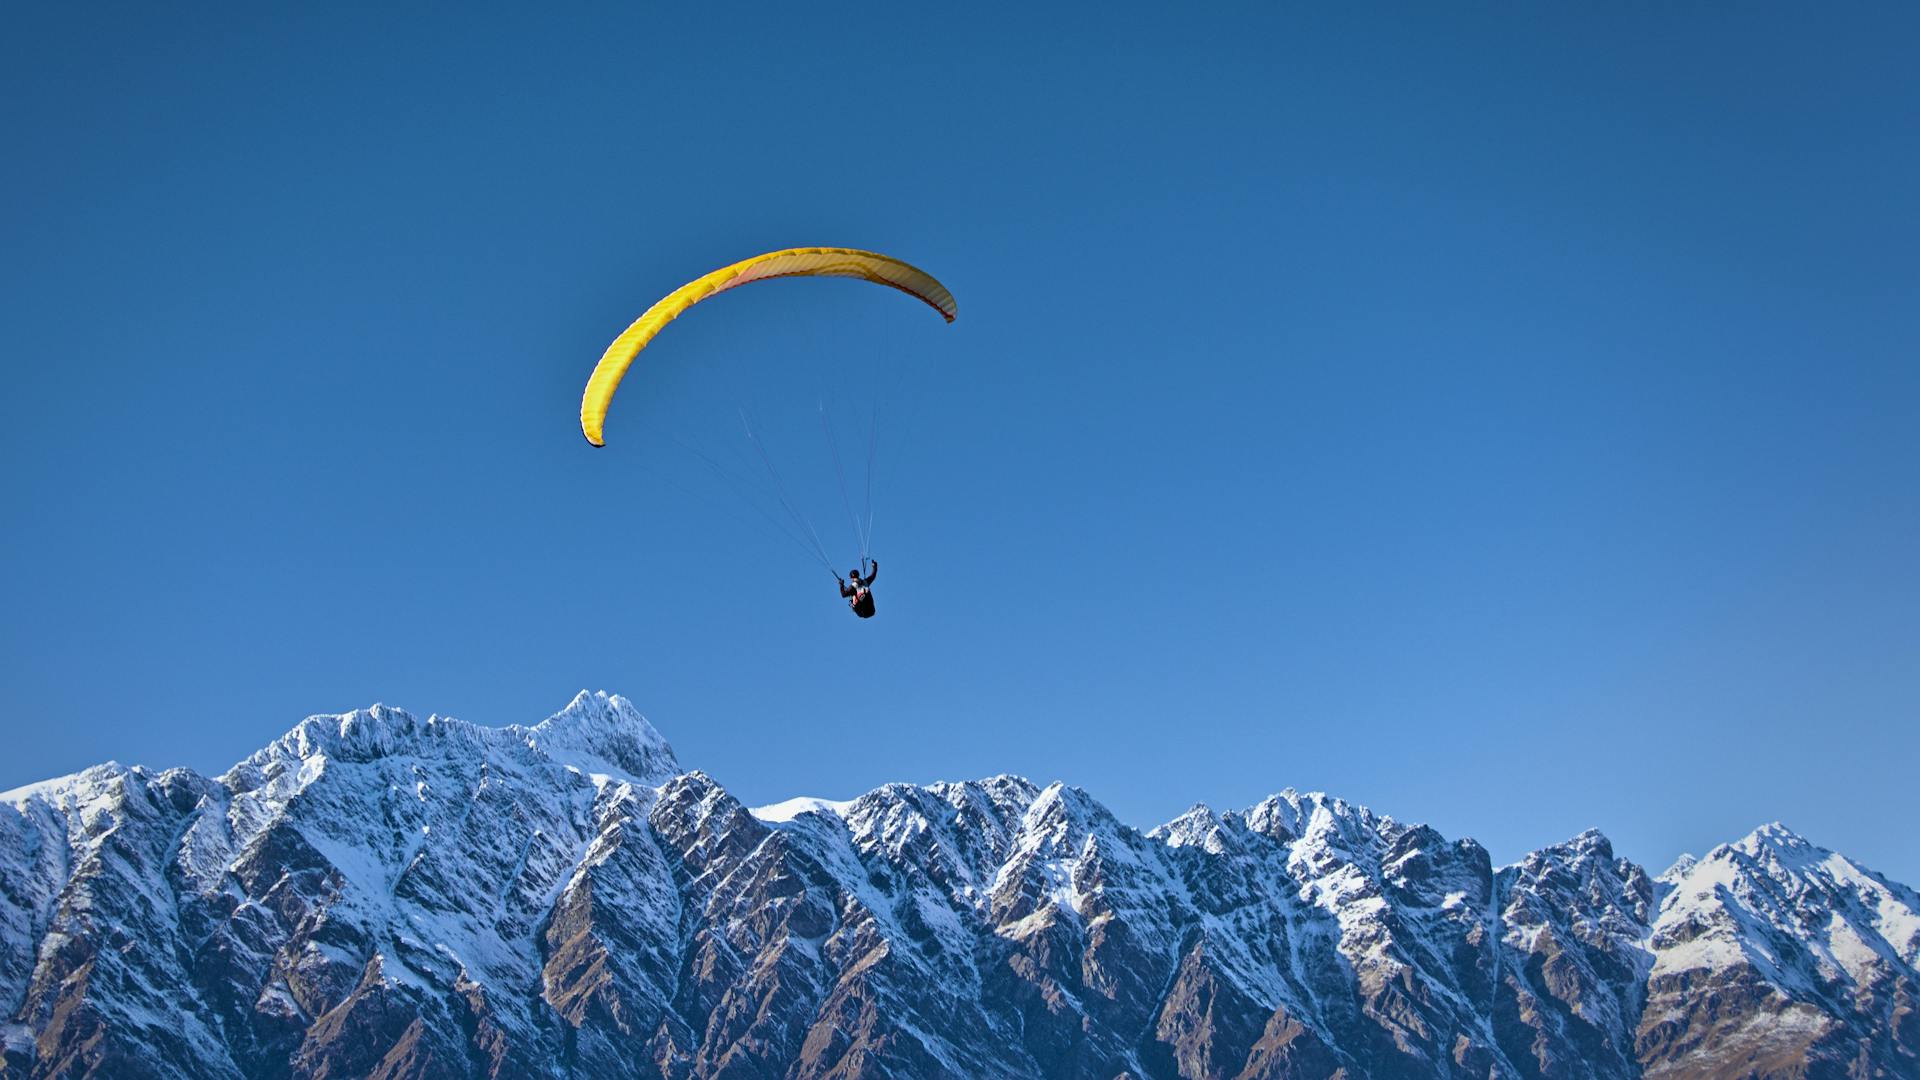 Man soaring above mountains while paragliding 